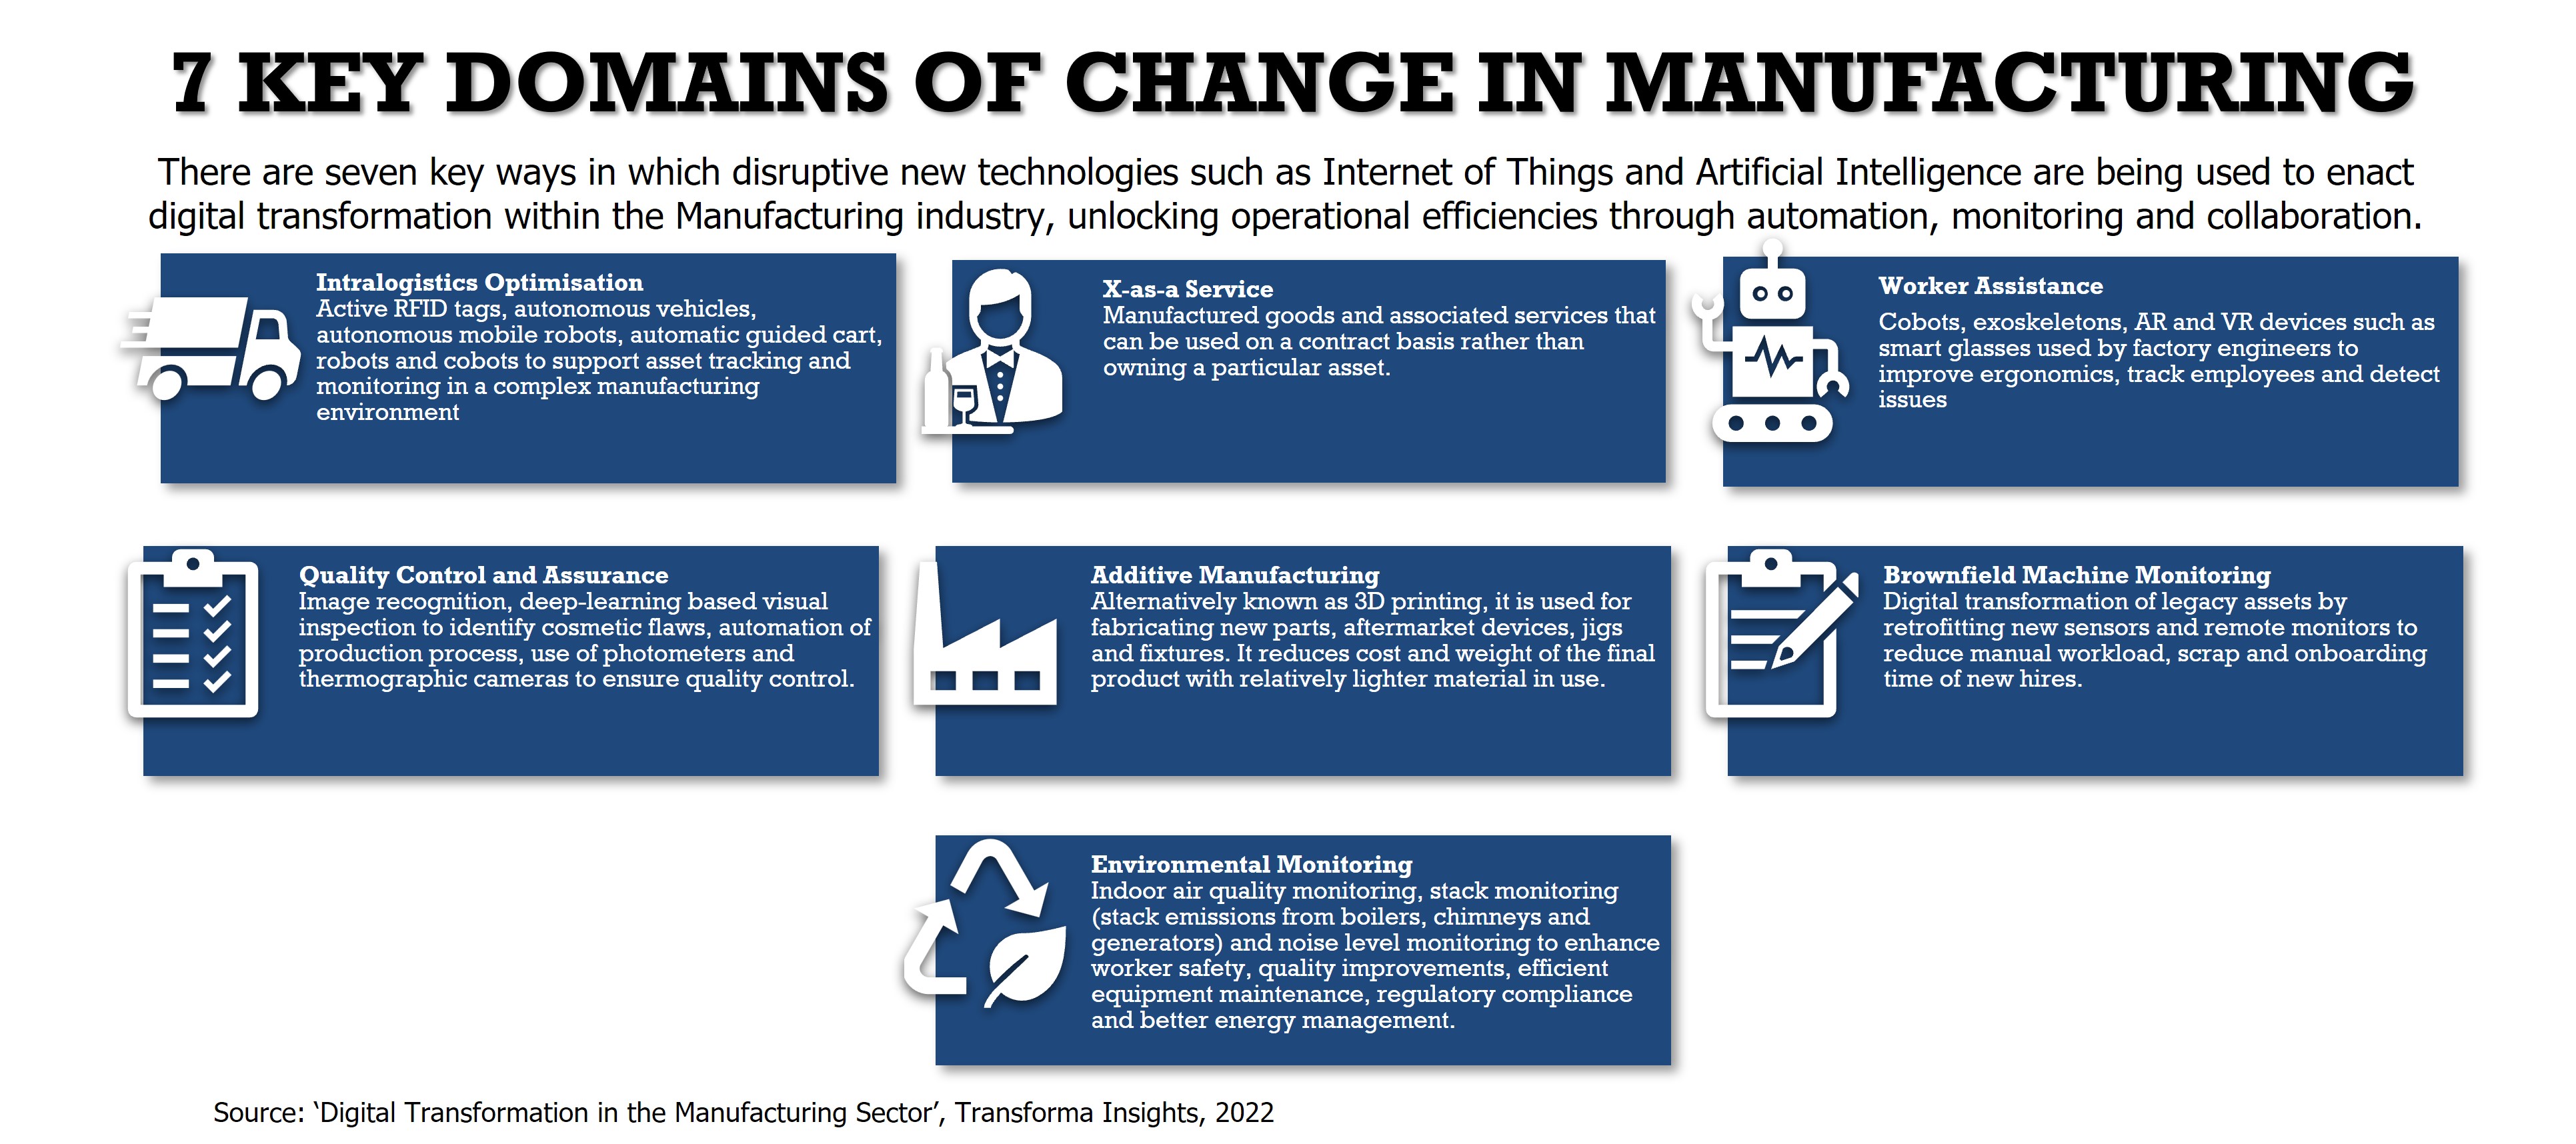 7 Domains of Change in Manufacturing.jpg